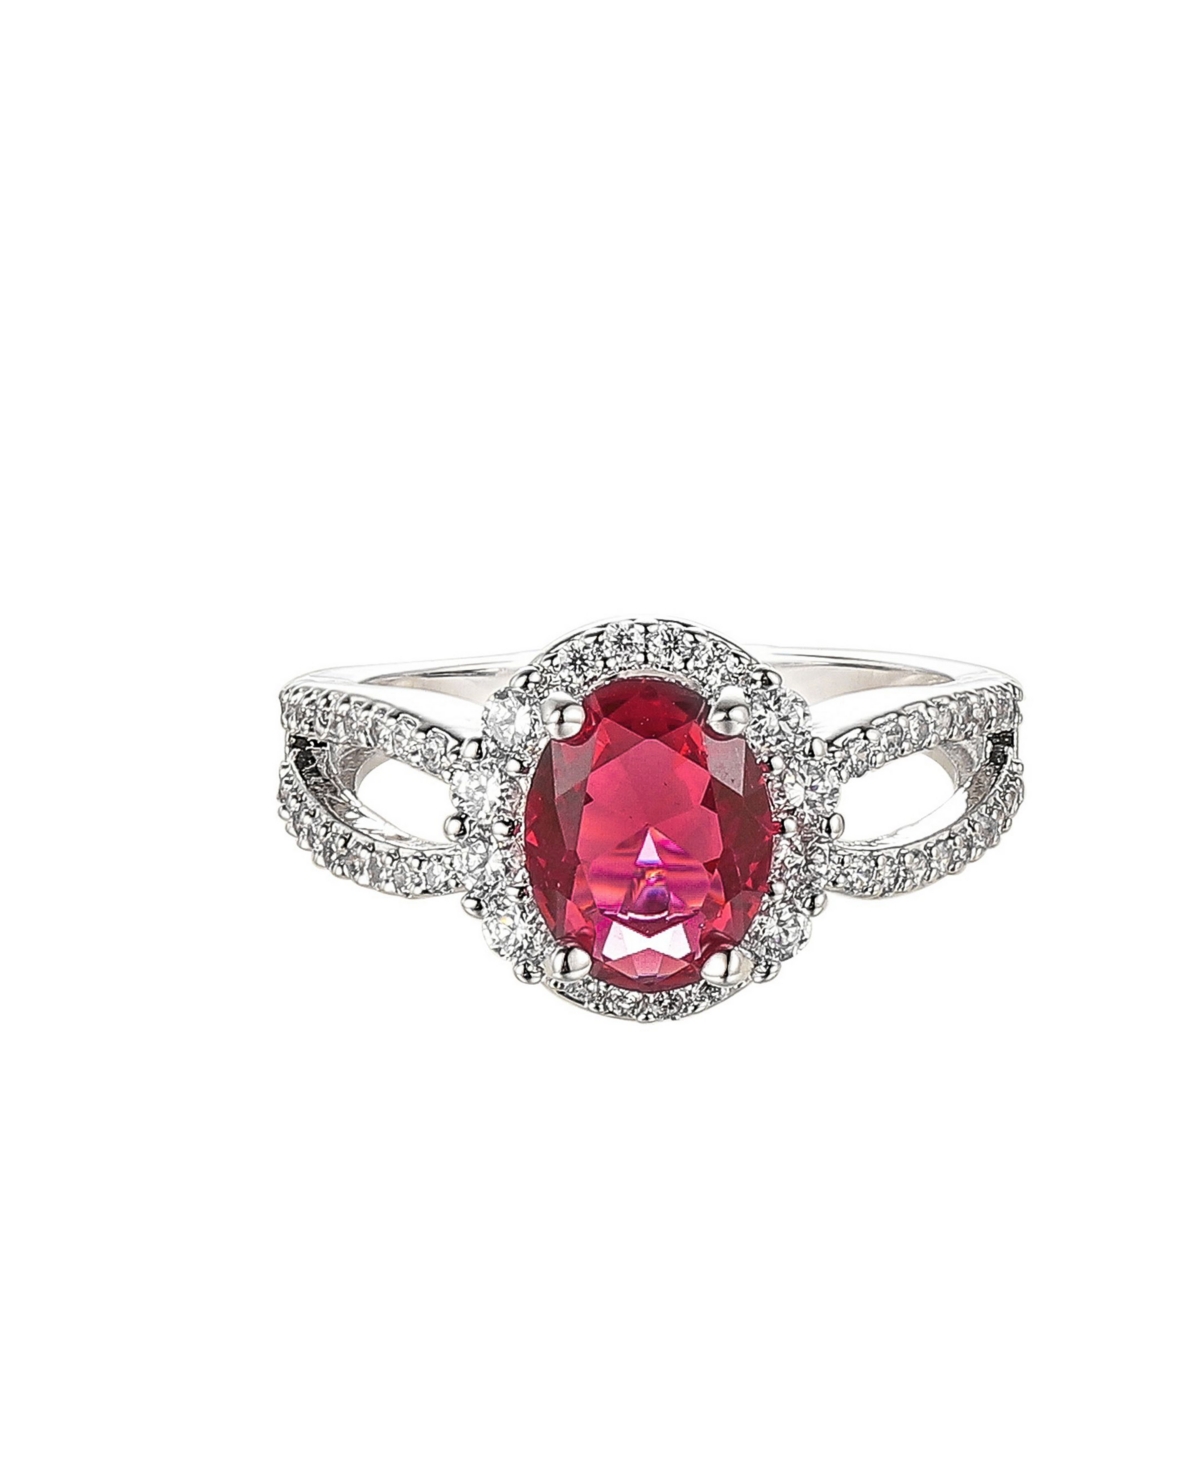 A & M Silver-Tone Ruby Accent Ring